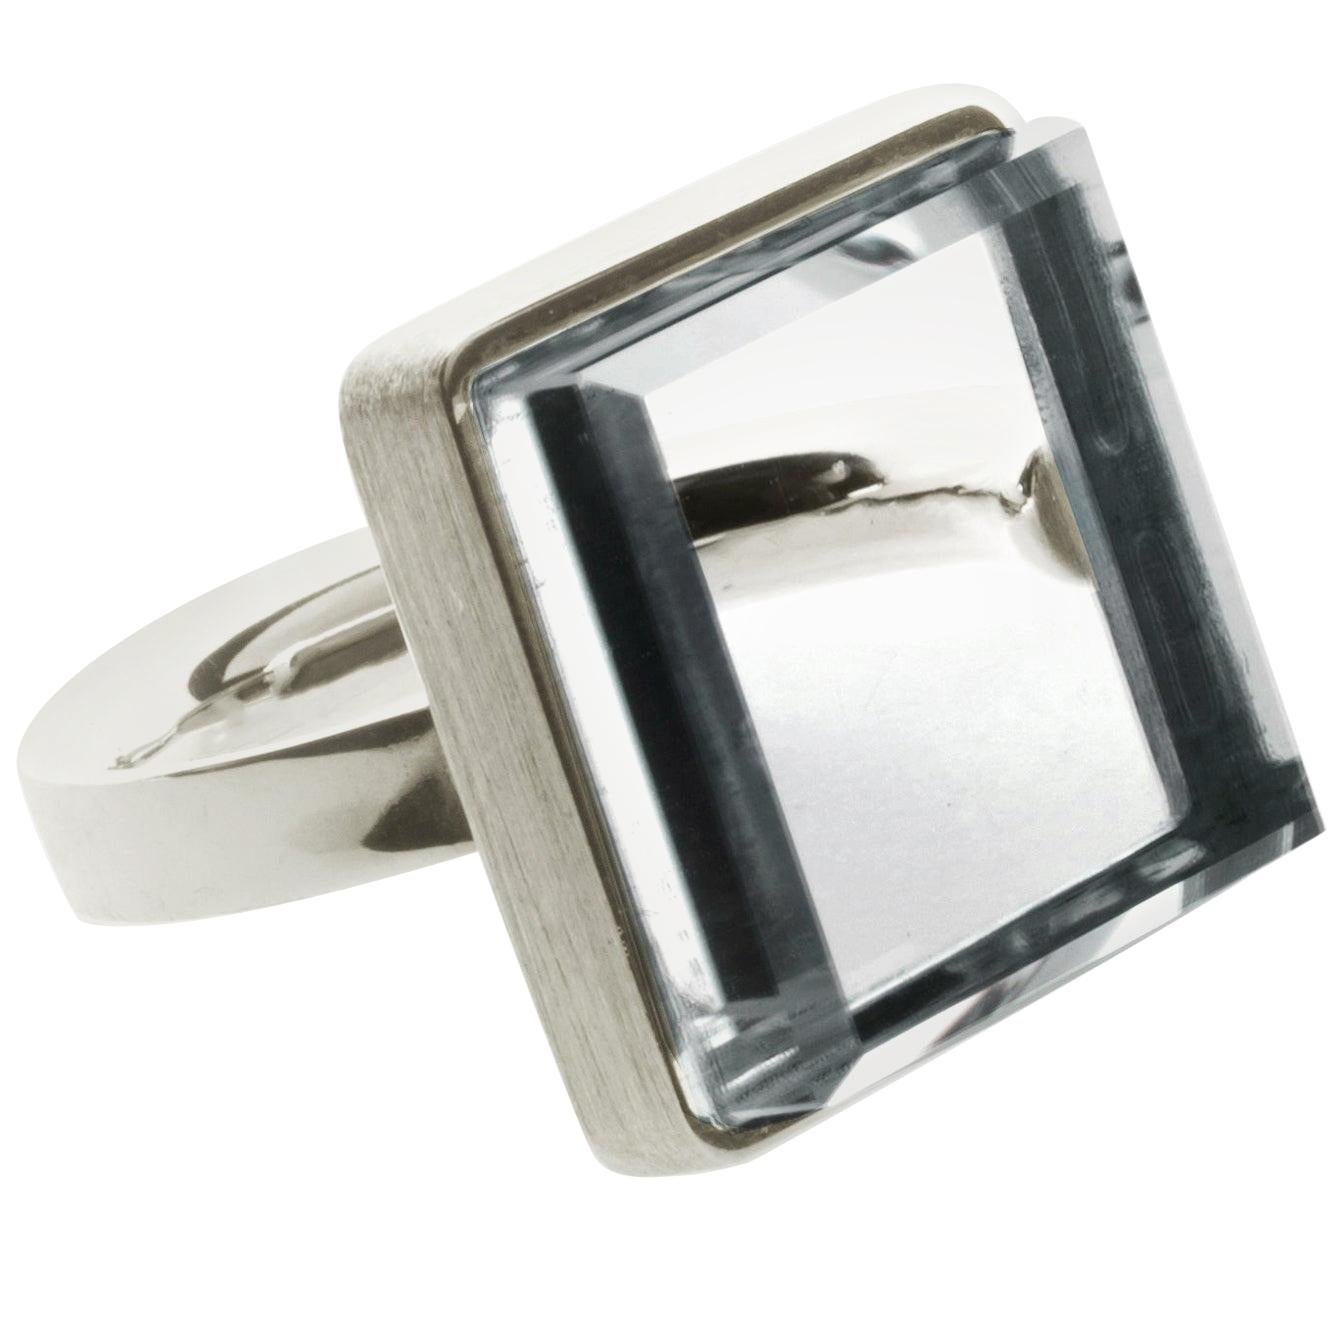 White Gold Art Deco Style Ring with Quartz by Artist Featured in Vogue